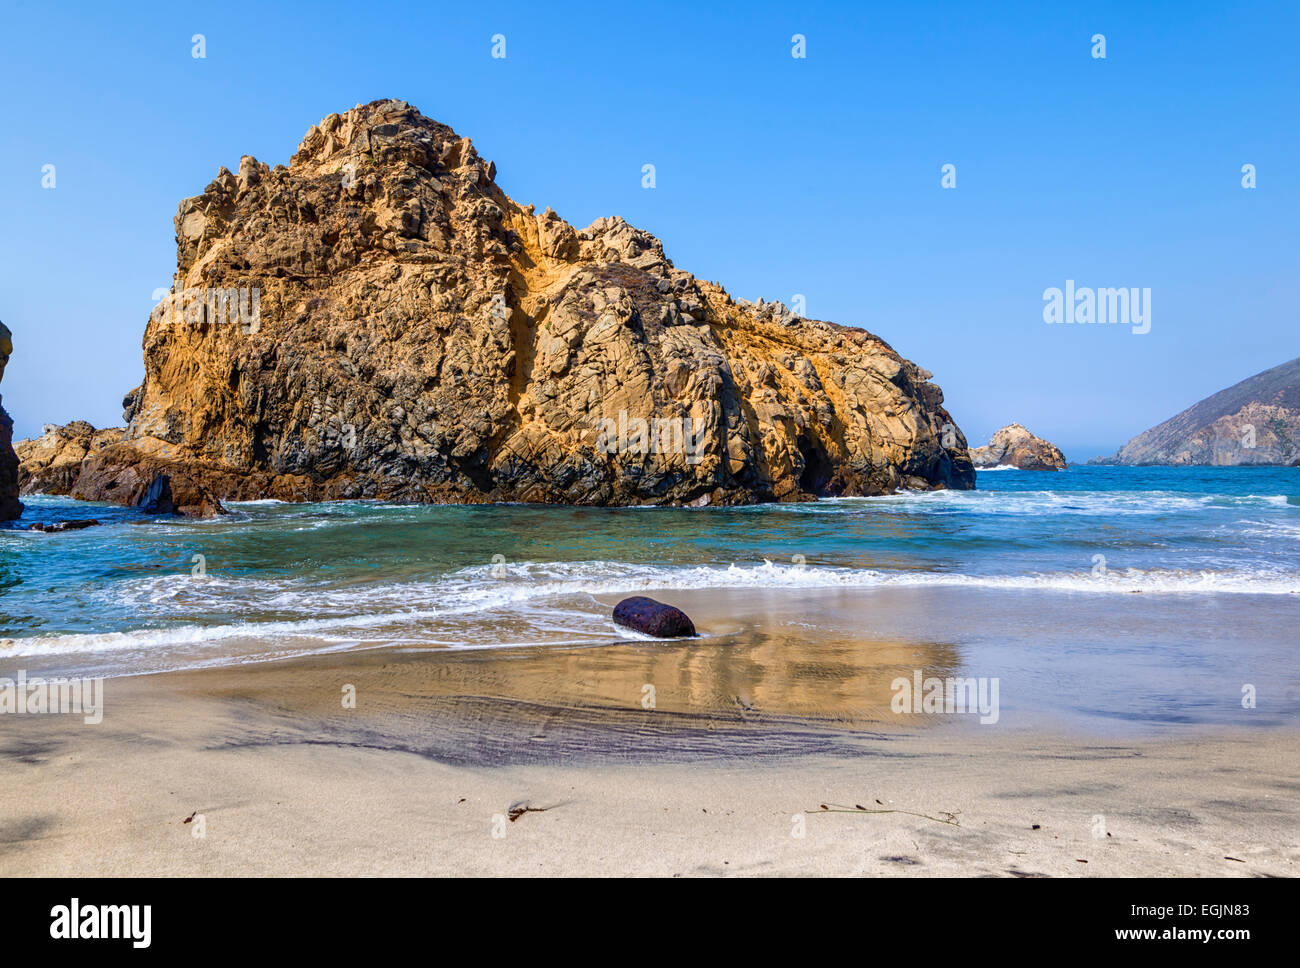 Pfeiffer Arch rock formation in the ocean viewed from Pfeiffer Beach. Pfeiffer Big Sur State Park, California, United States. Stock Photo